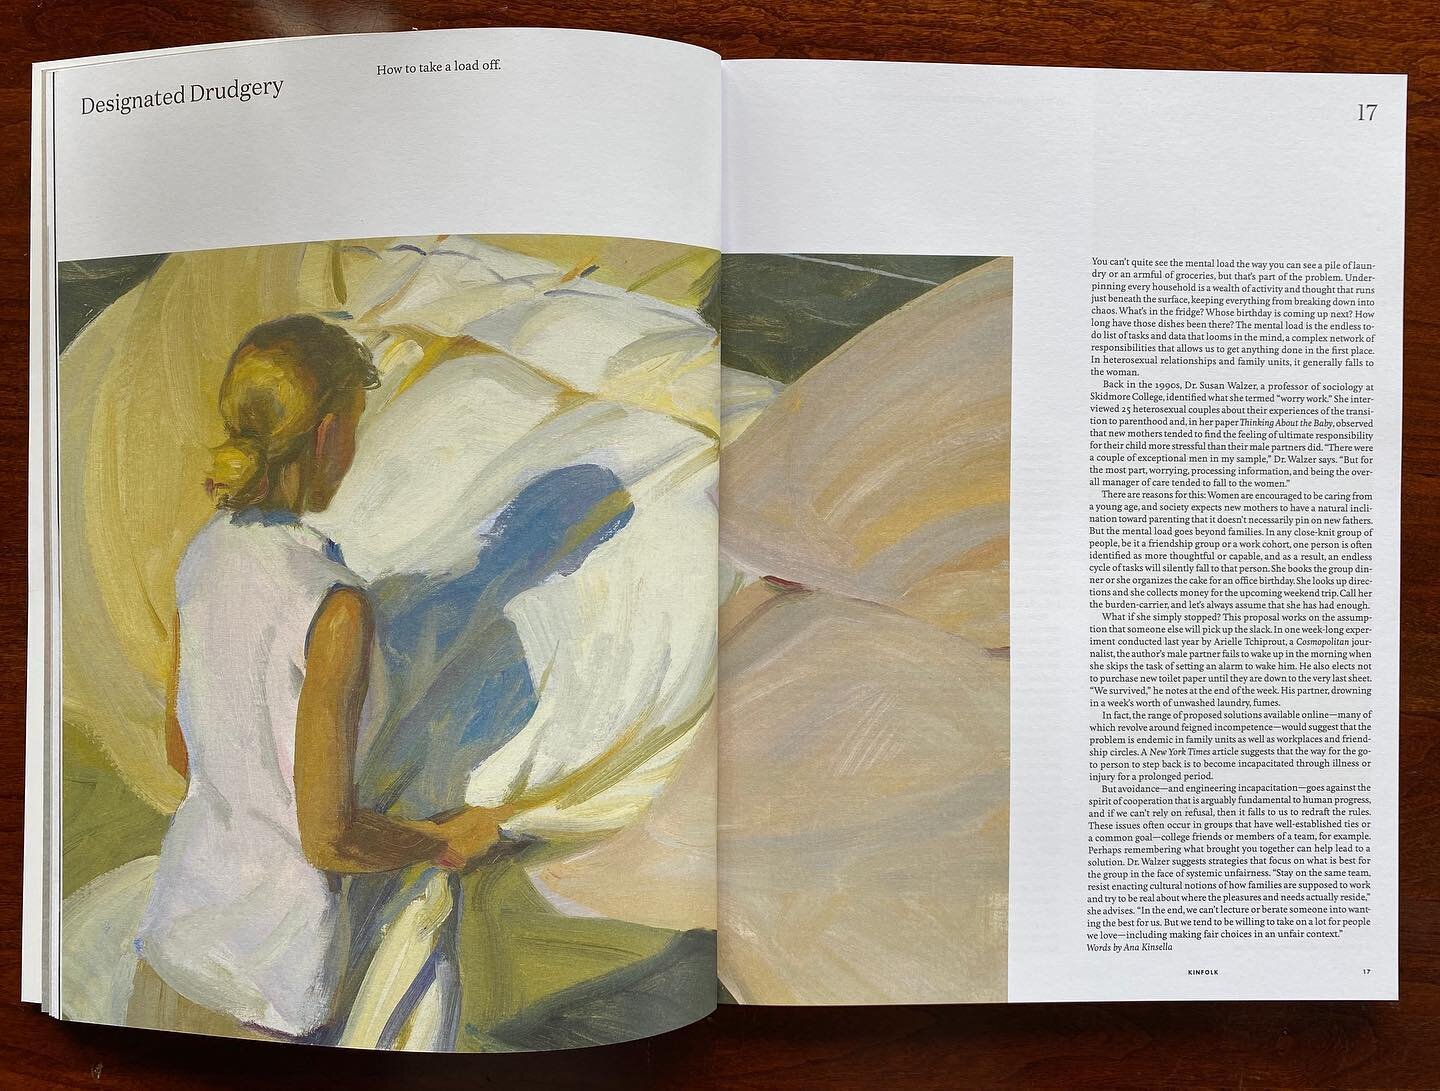 It&rsquo;s always great to see your artwork printed on the pages of a magazine.  Latest issue of KINFOLK - issue 36
&ldquo;In the Light of Wind&rdquo;
.
.
.
#fineart #pleinair #oilpainting #classicalimpressionism #laundry #kinfolk